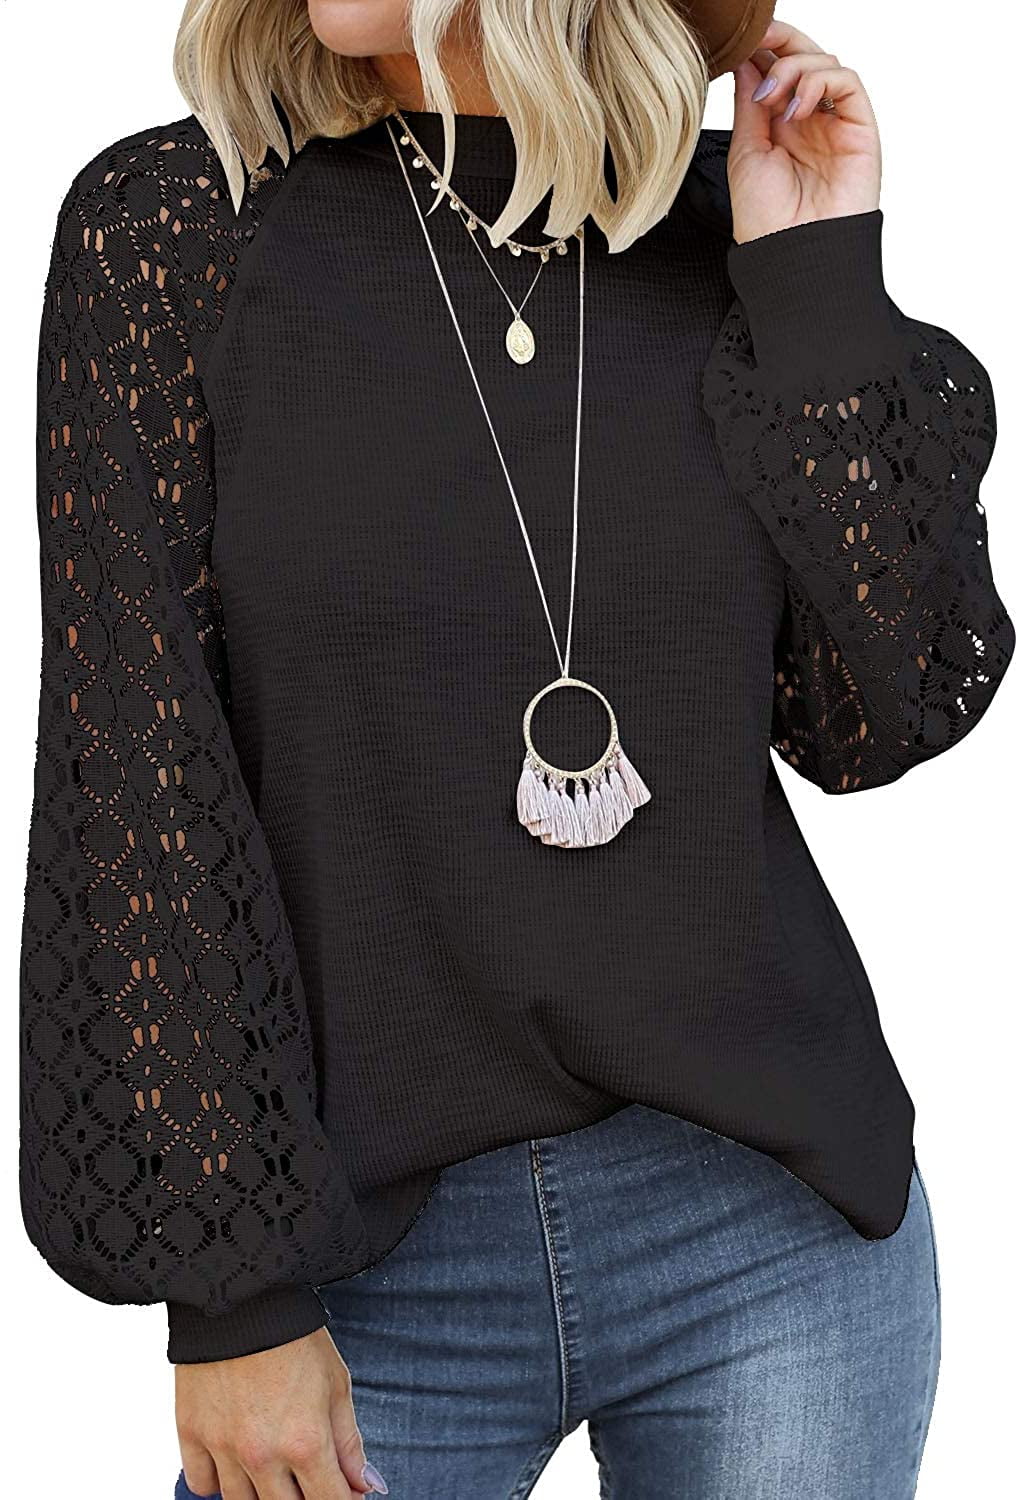 Women's Long Sleeve Tops Lace Casual 